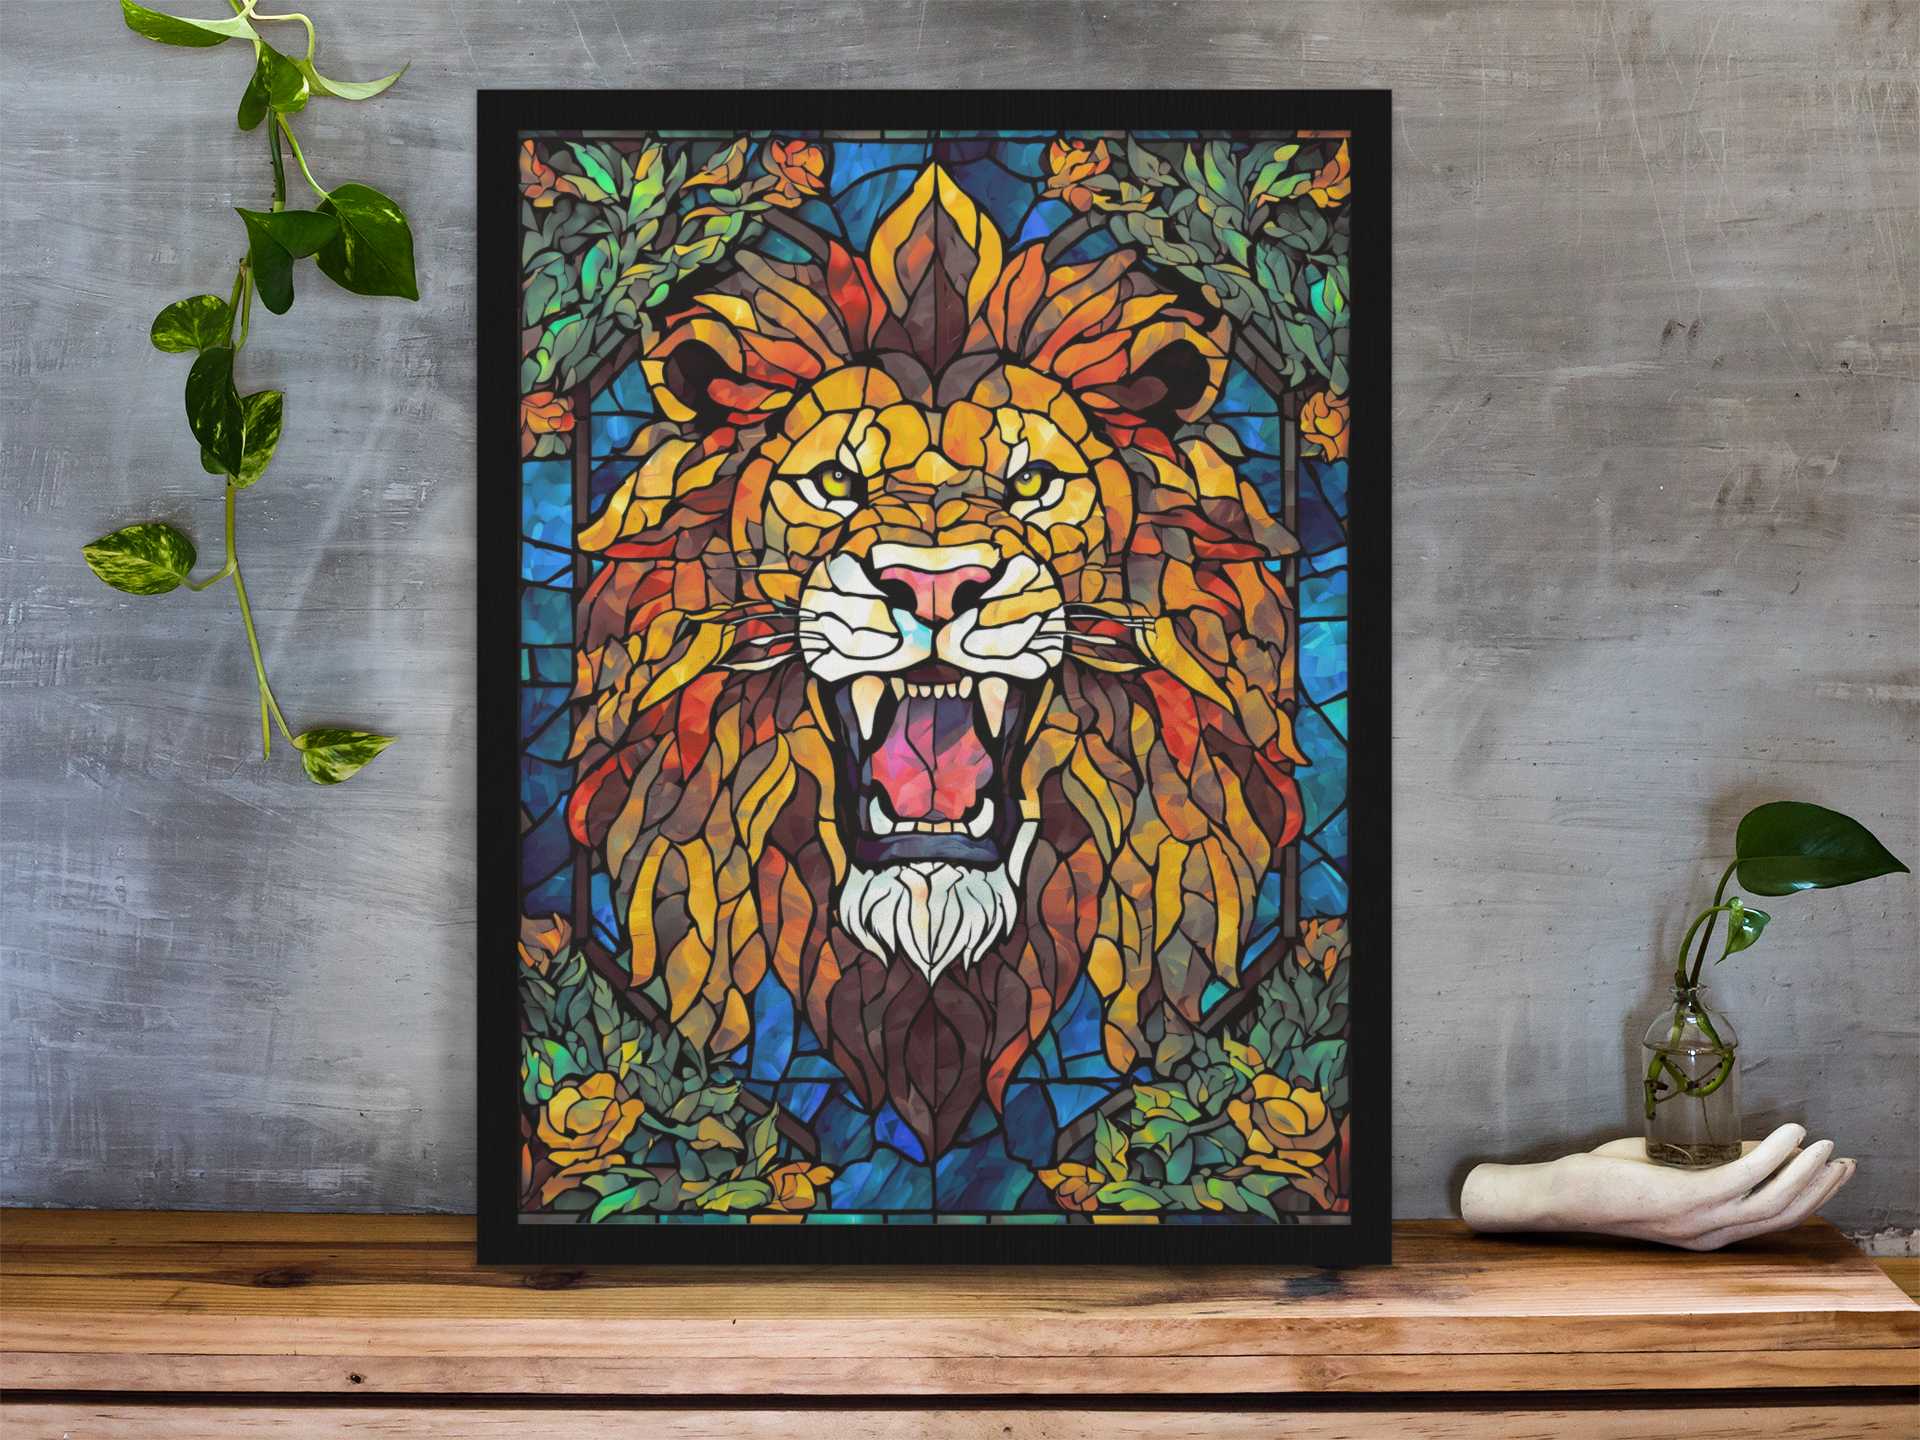 King of the jungle - Poster - Ever colorful